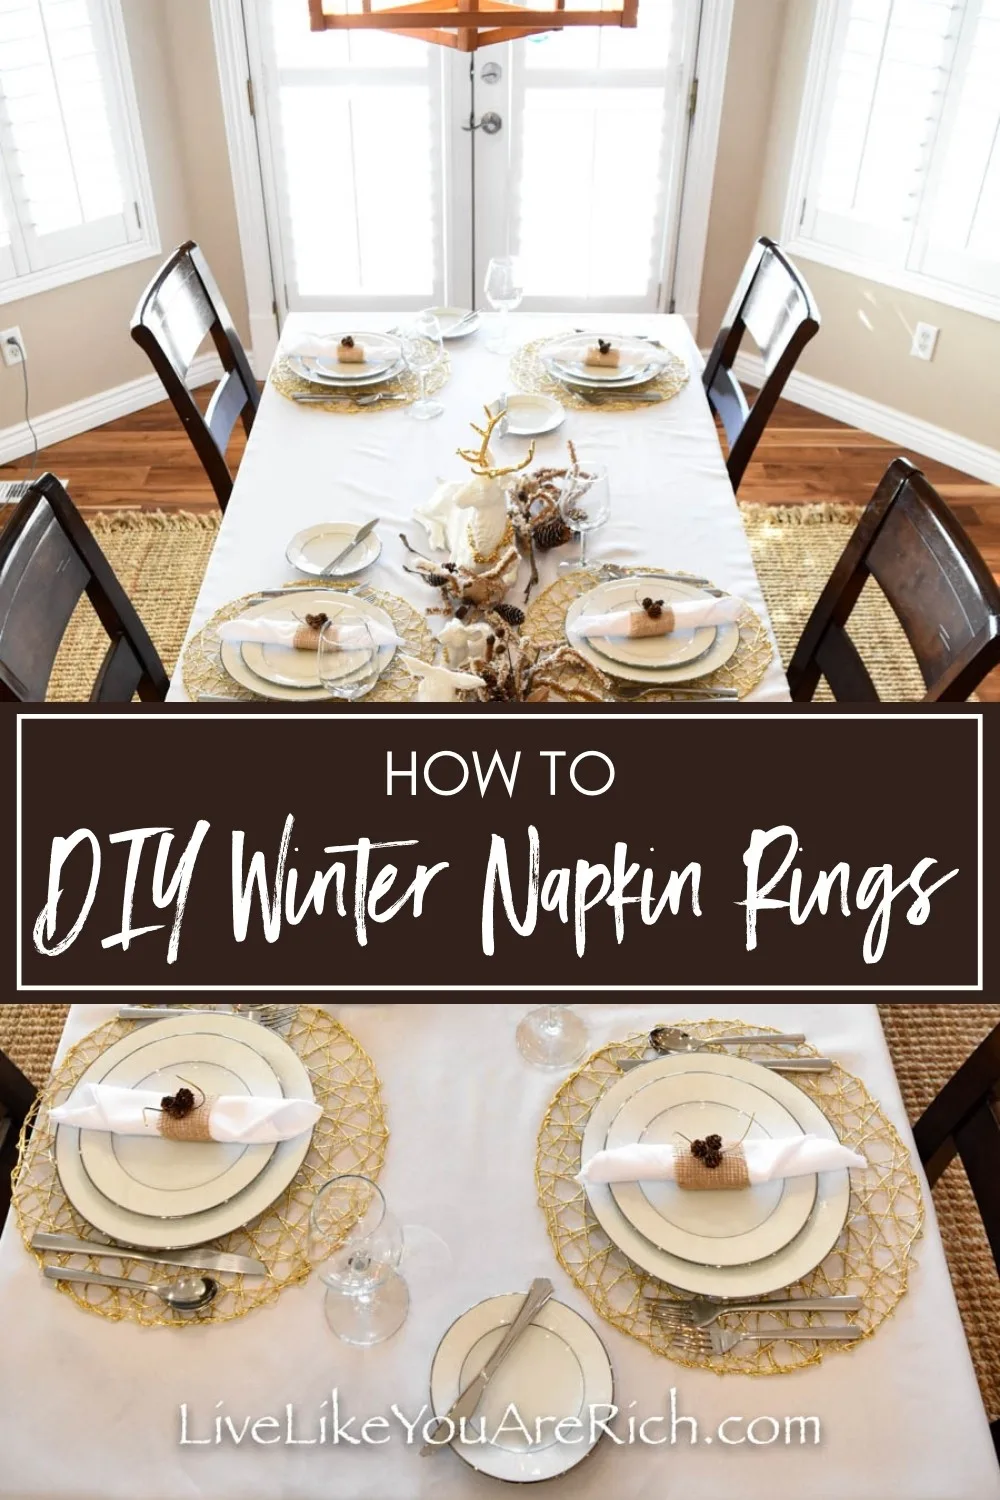 Recently, I decided to make these DIY Winter Napkin Rings to match my white winter tablescape. These napkin rings came together pretty last minute. I had about 2 hours before some family arrived for a Christmas dinner and I still hadn’t set the table or finished the food! It only takes 45 minutes to make 10 of these napkin rings.